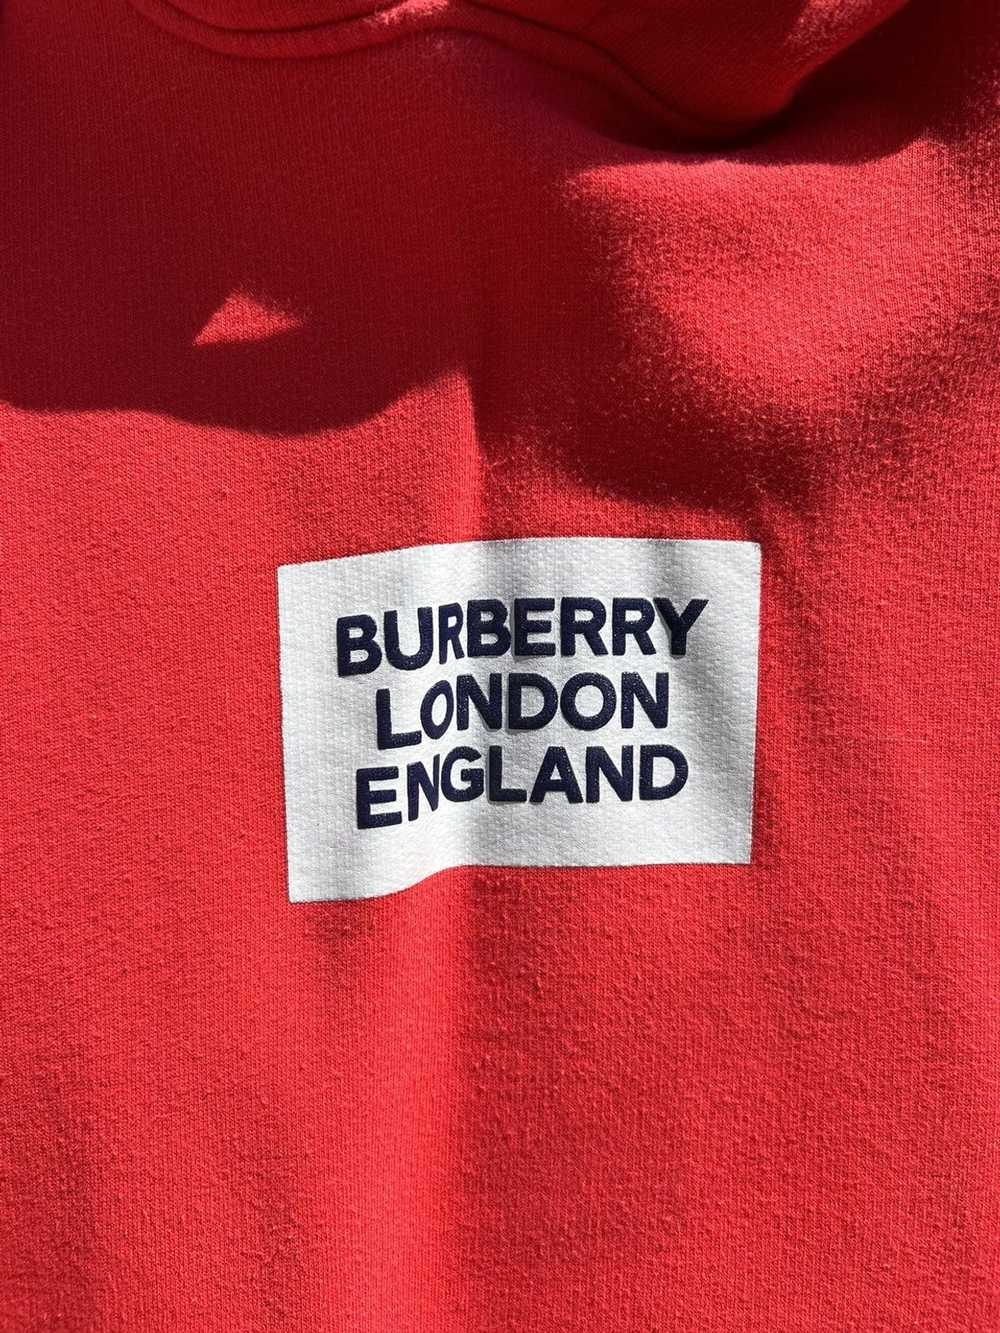 Burberry F/W 19 First Run Of The Box Logo - image 2